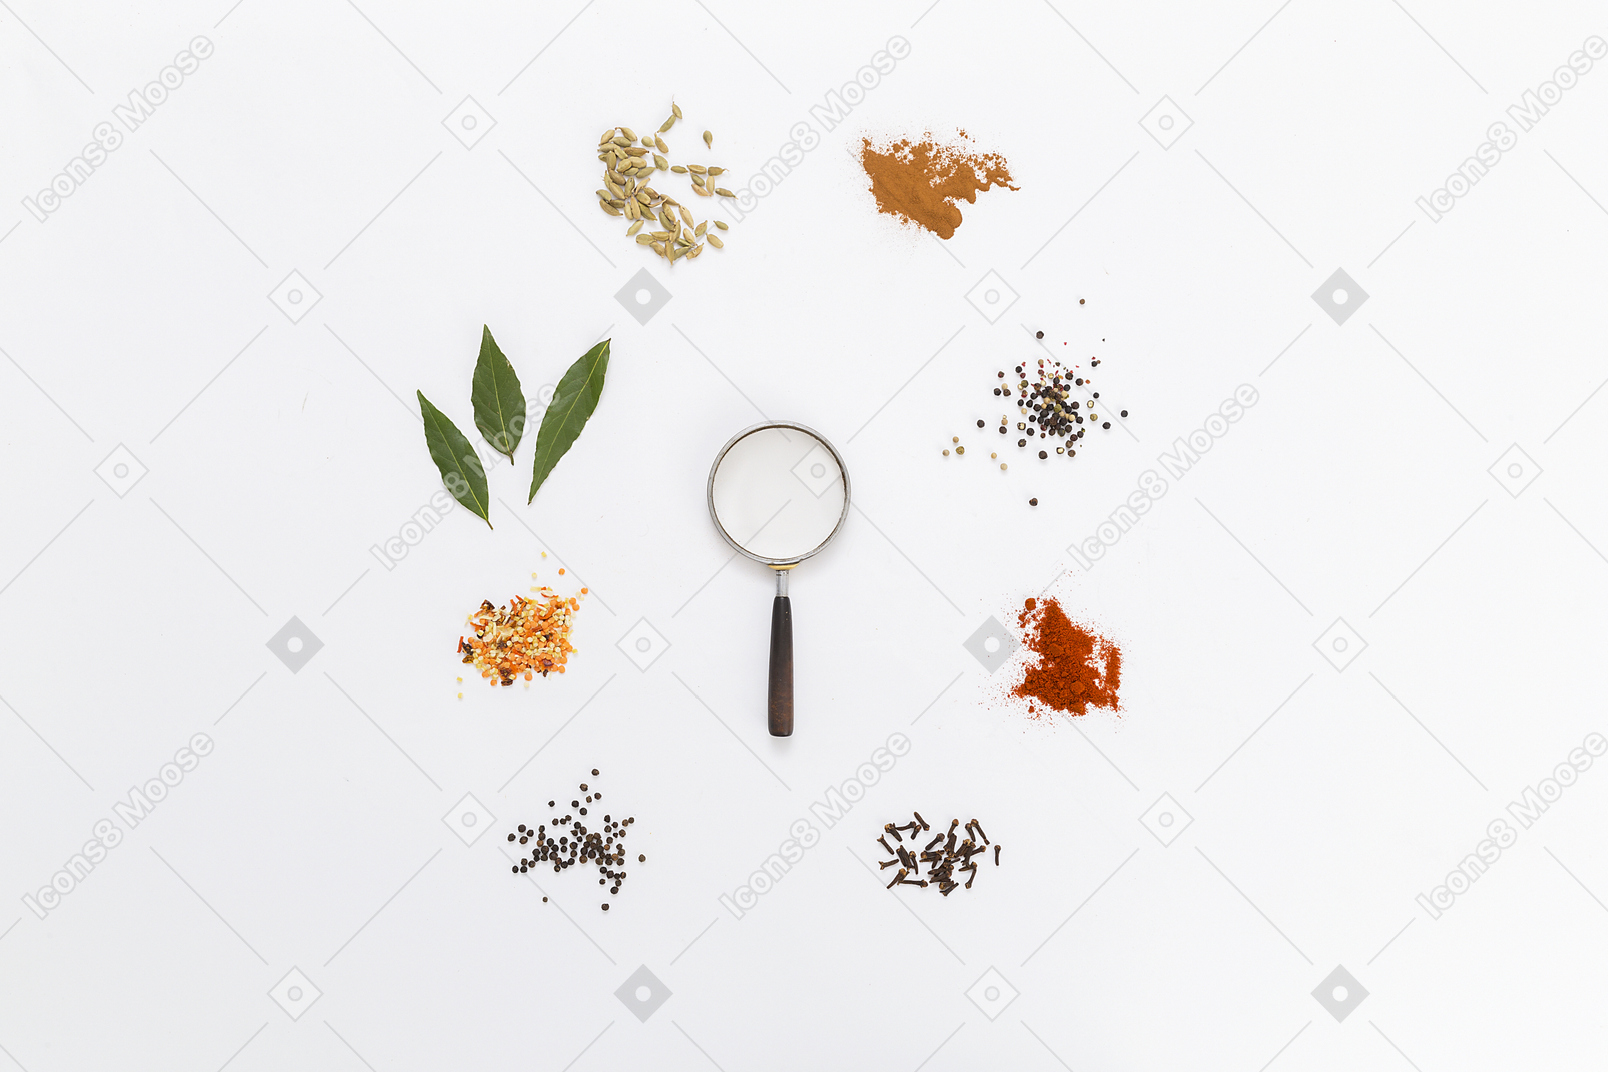 Circle of herbs and spices with magnifying glass in centre